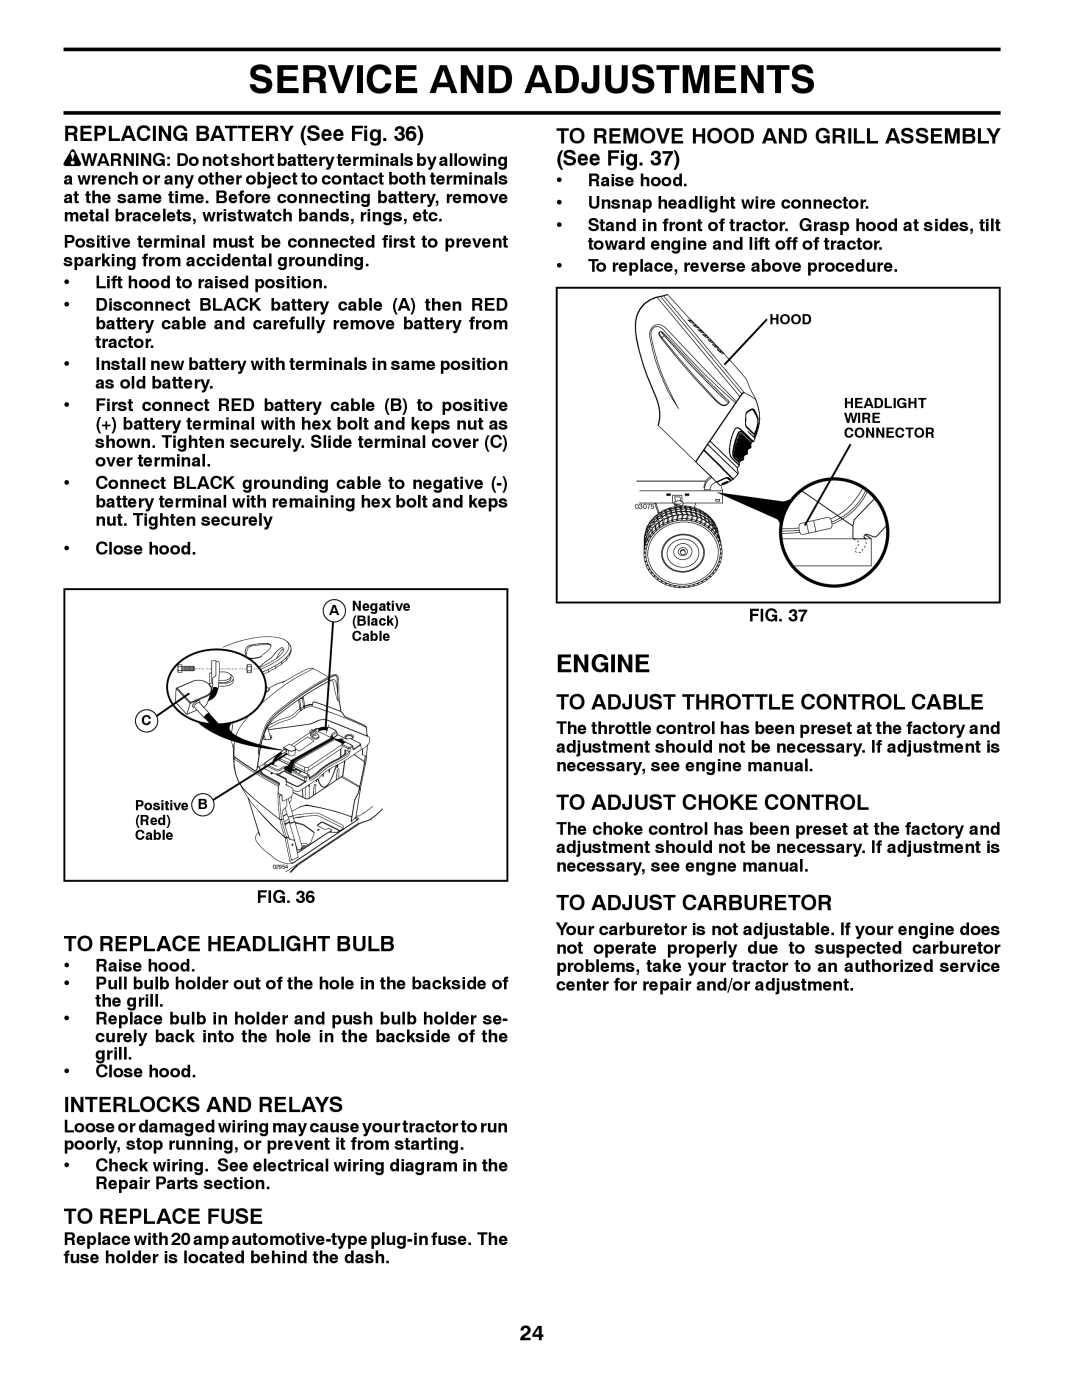 Poulan 417920 manual REPLACING BATTERY See Fig, To Replace Headlight Bulb, Interlocks And Relays, To Replace Fuse, Engine 